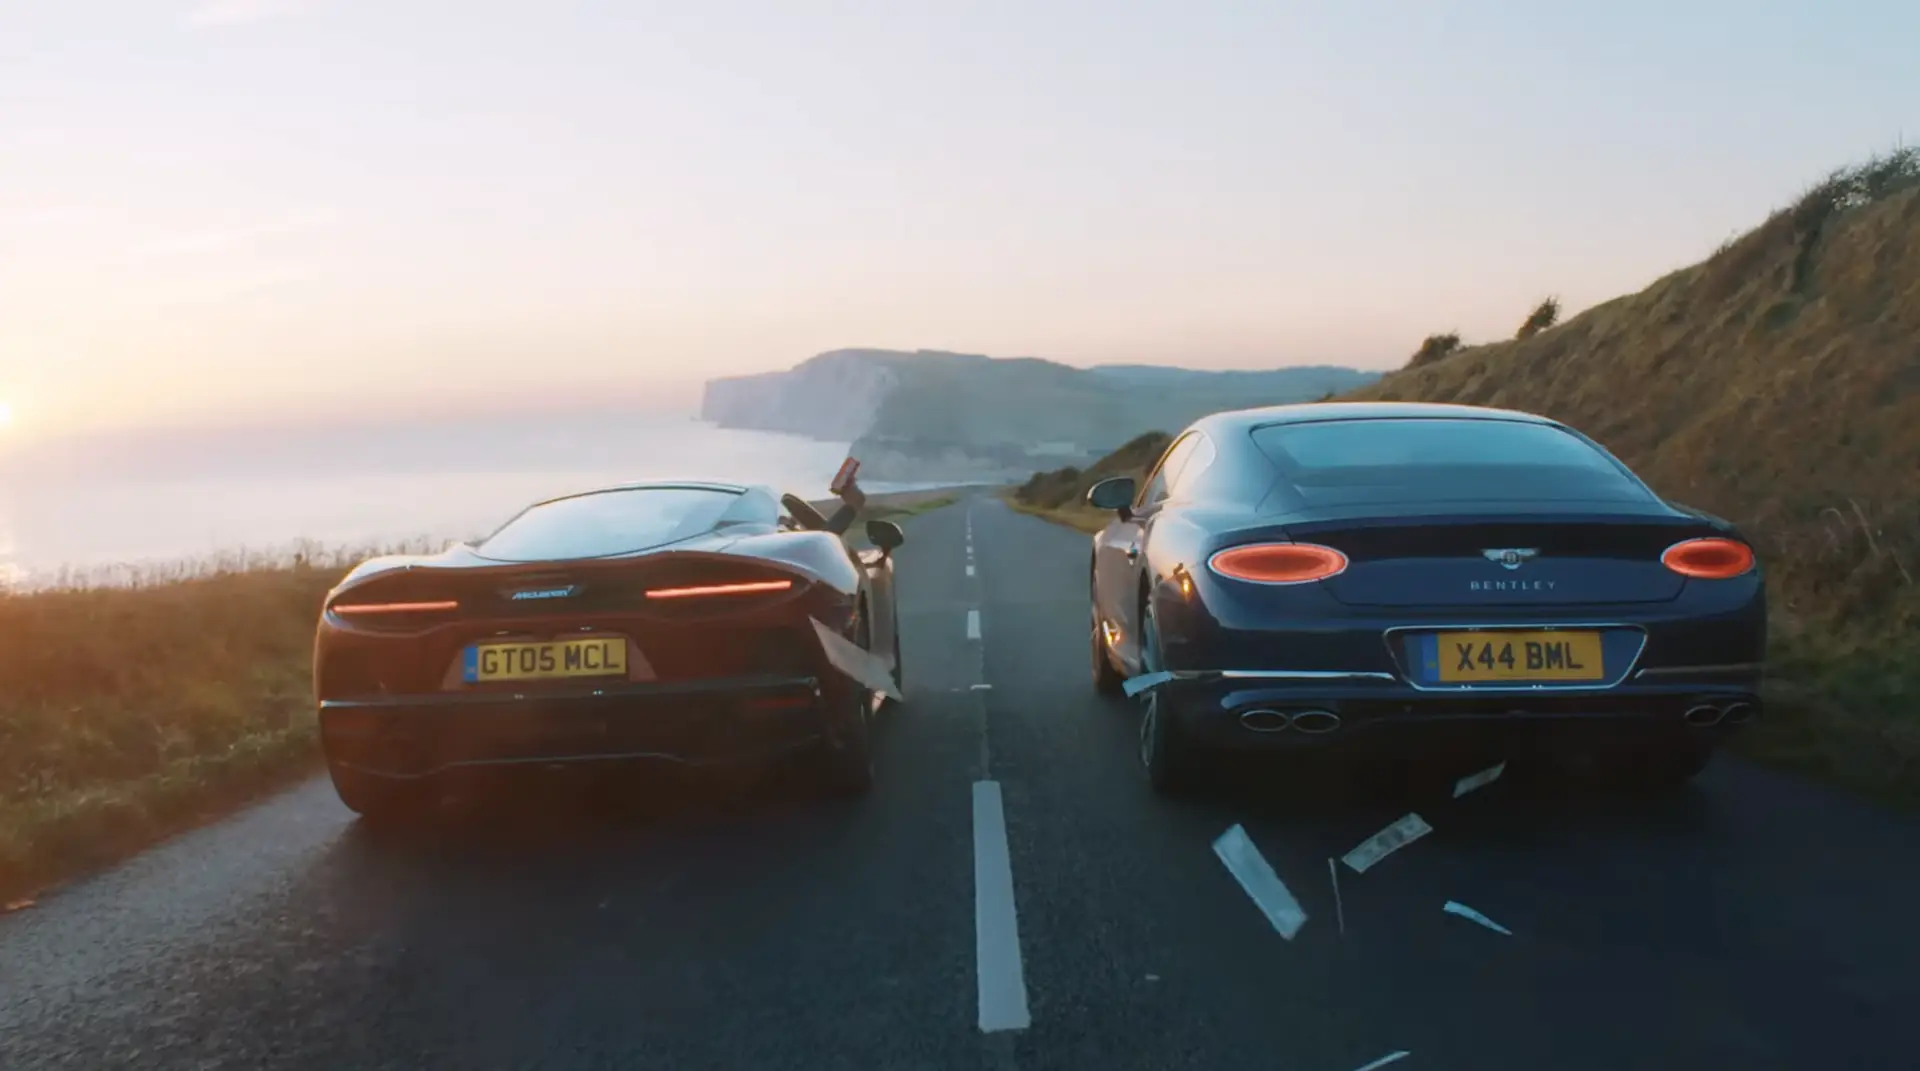 Auto Trader review video testing new McLaren GT against the new Bentley Continental GT